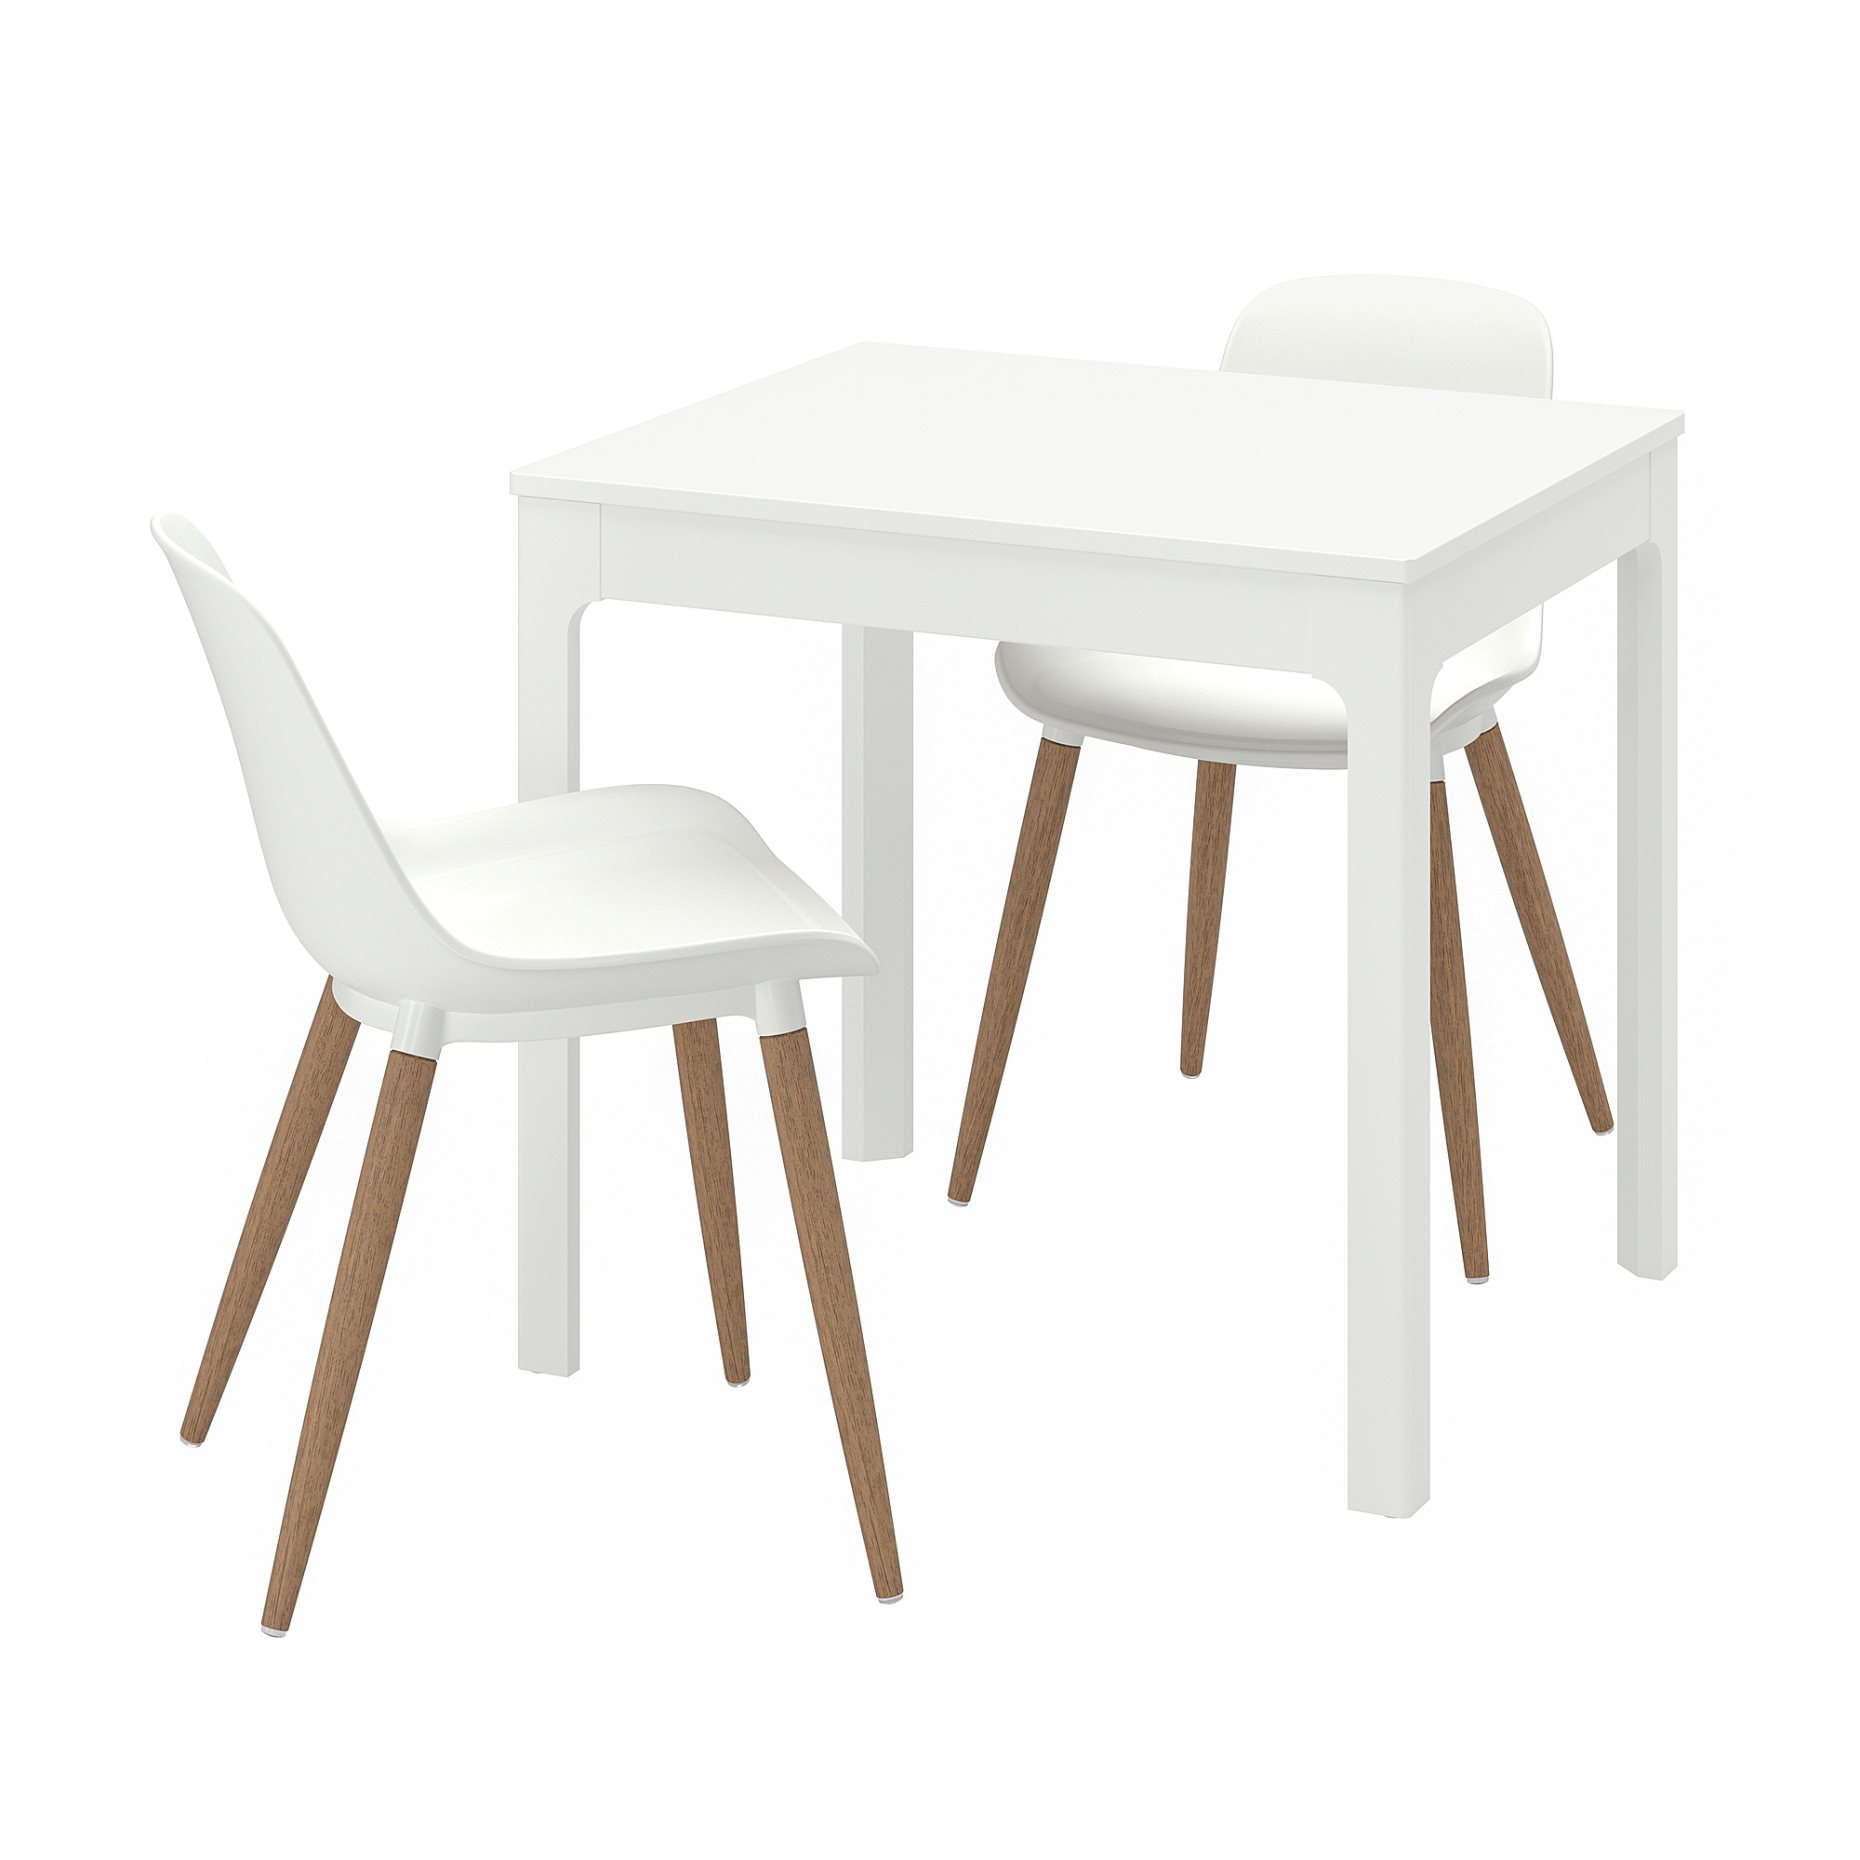 EKEDALEN/GRONSTA, table and 2 chairs, 80/120 cm, 995.487.98